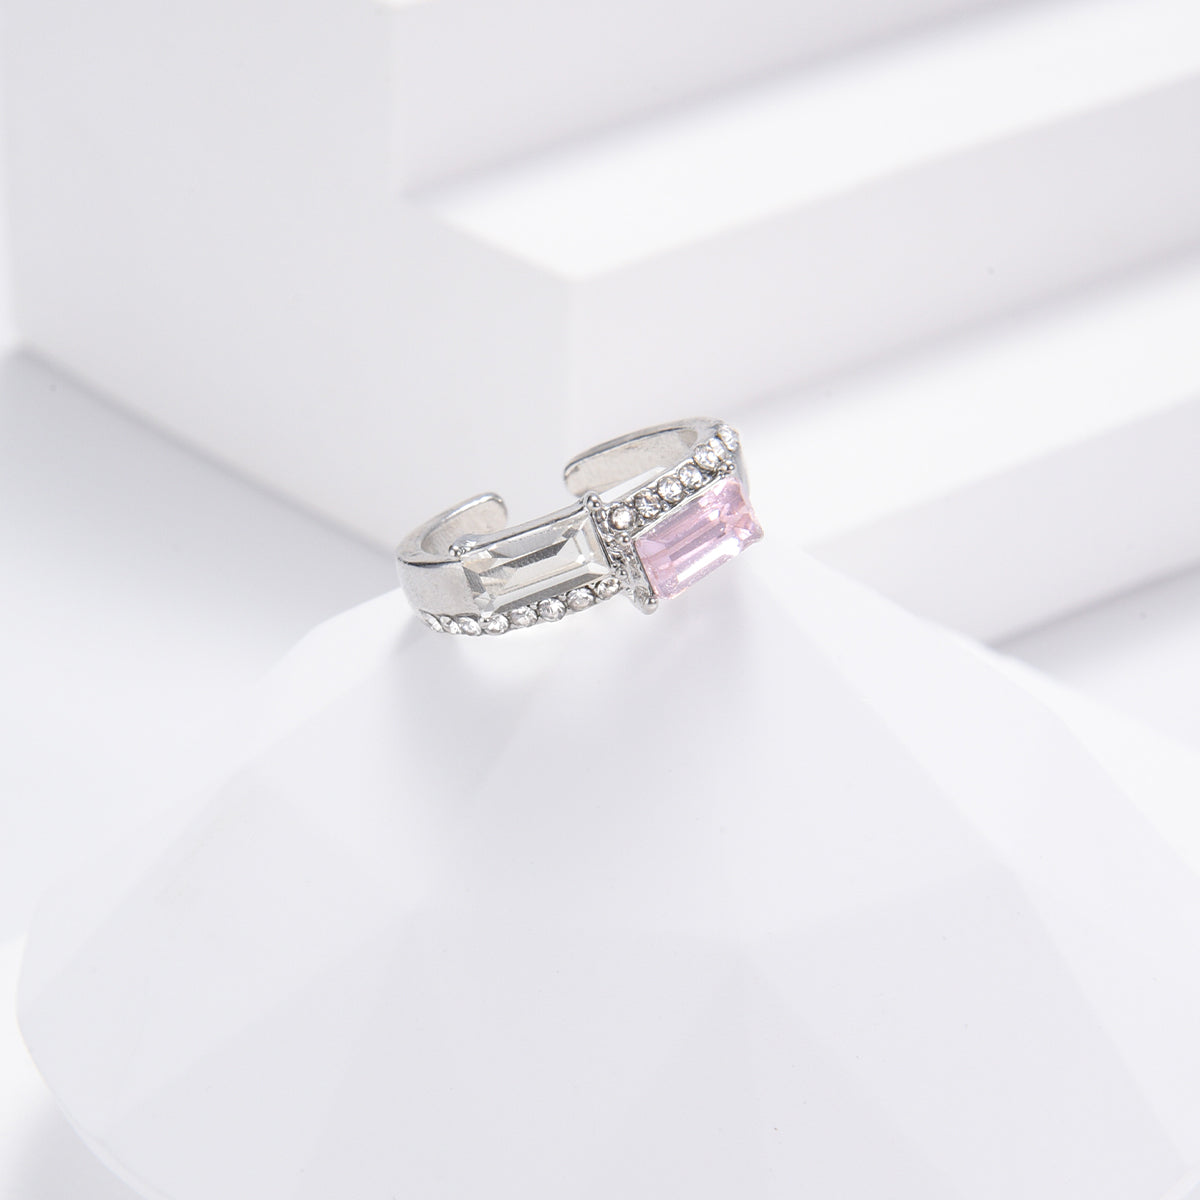 Classy ring with two shimmering rectangular gemstones